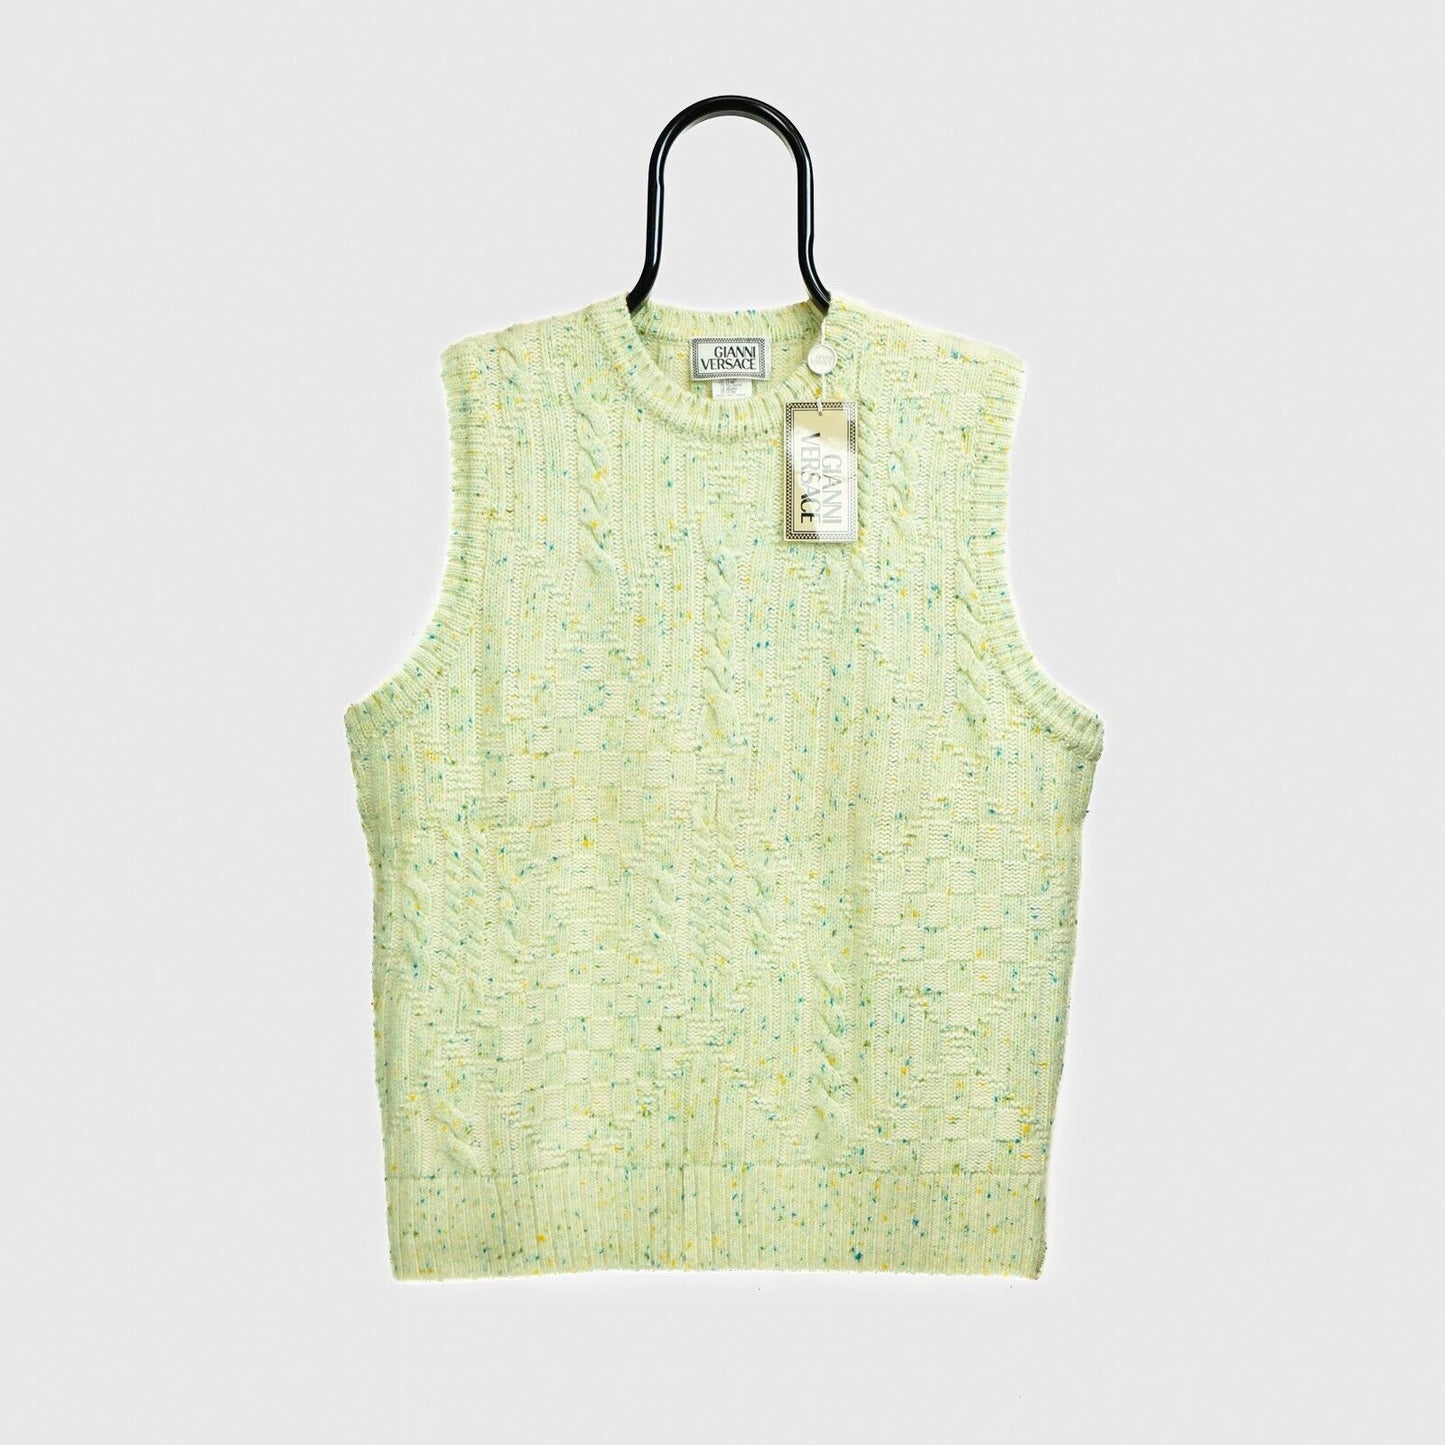 GIANNI VERSACE Knitted Vest Green Yellow Vintage 80s 90s